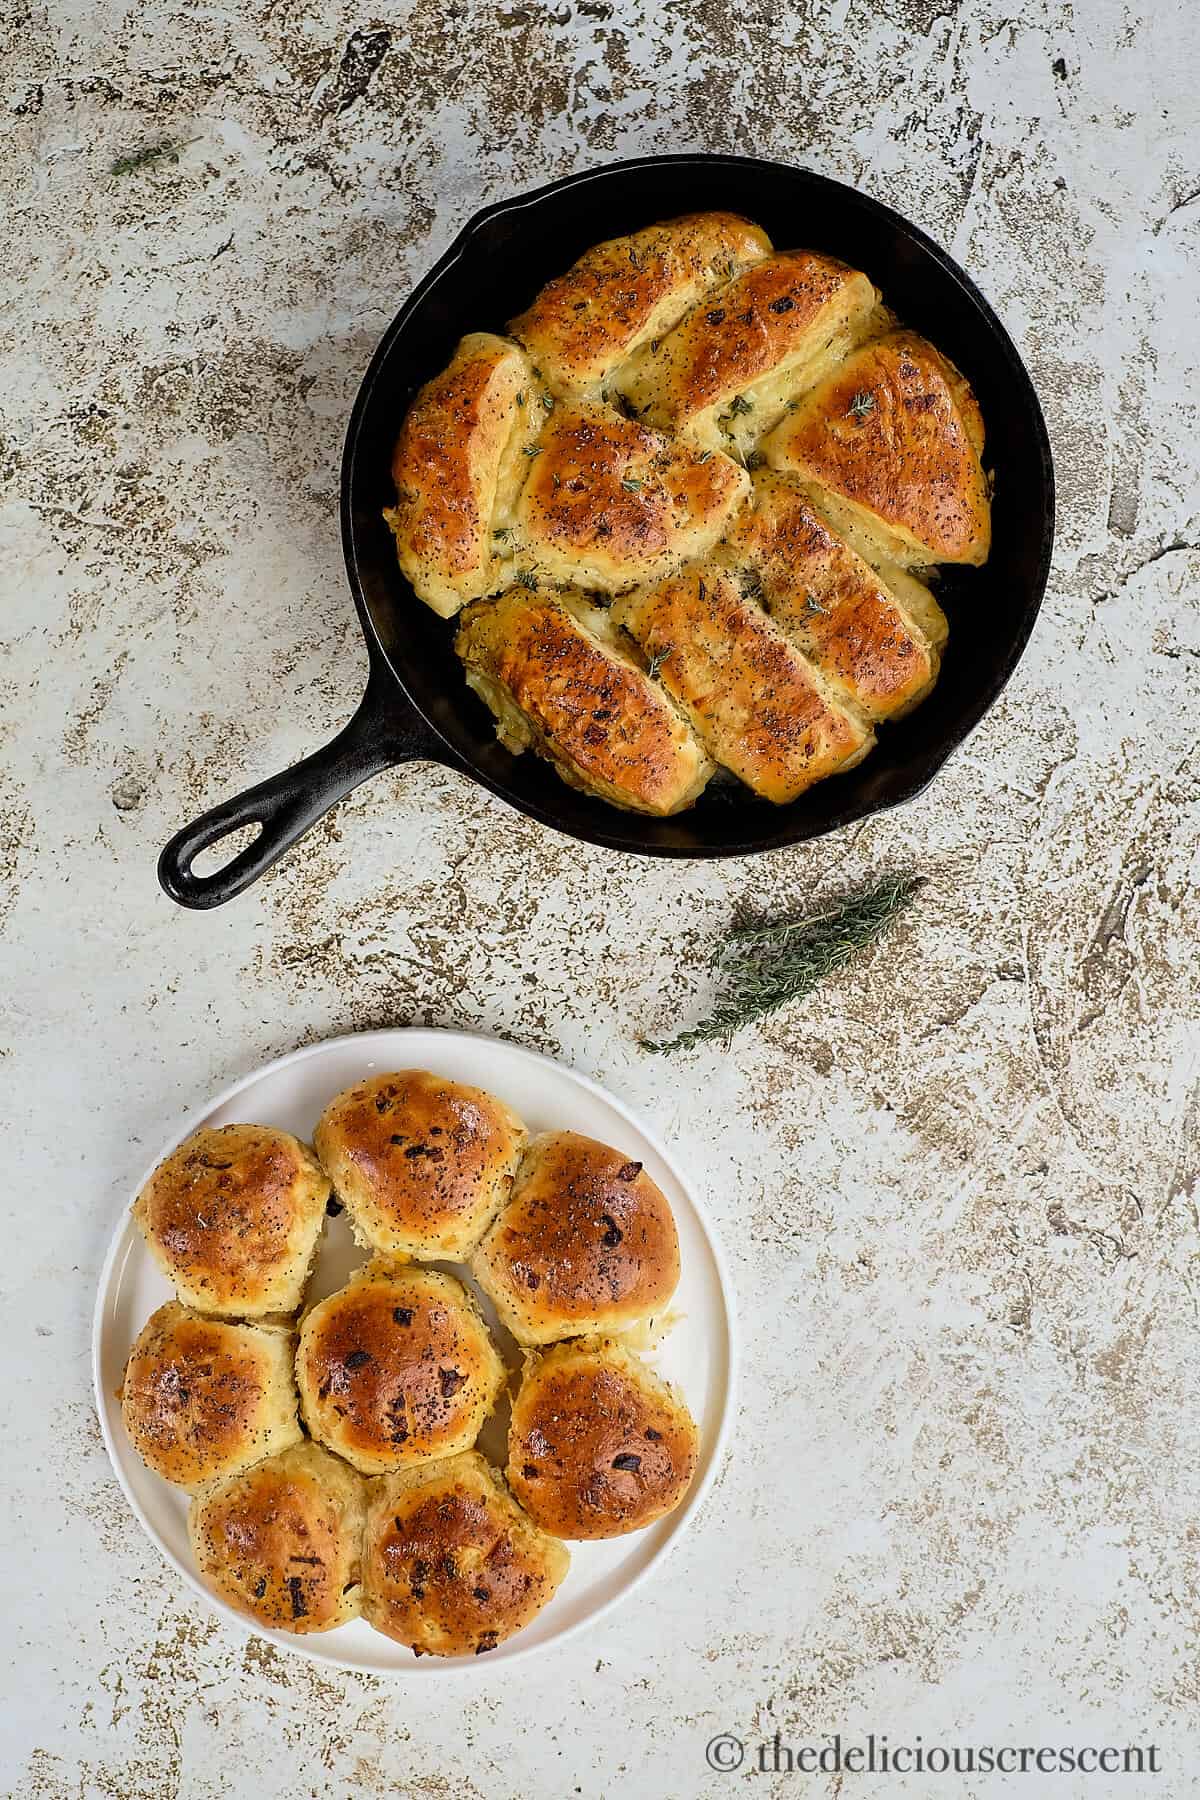 Two kinds of onion bread rolls on a table.